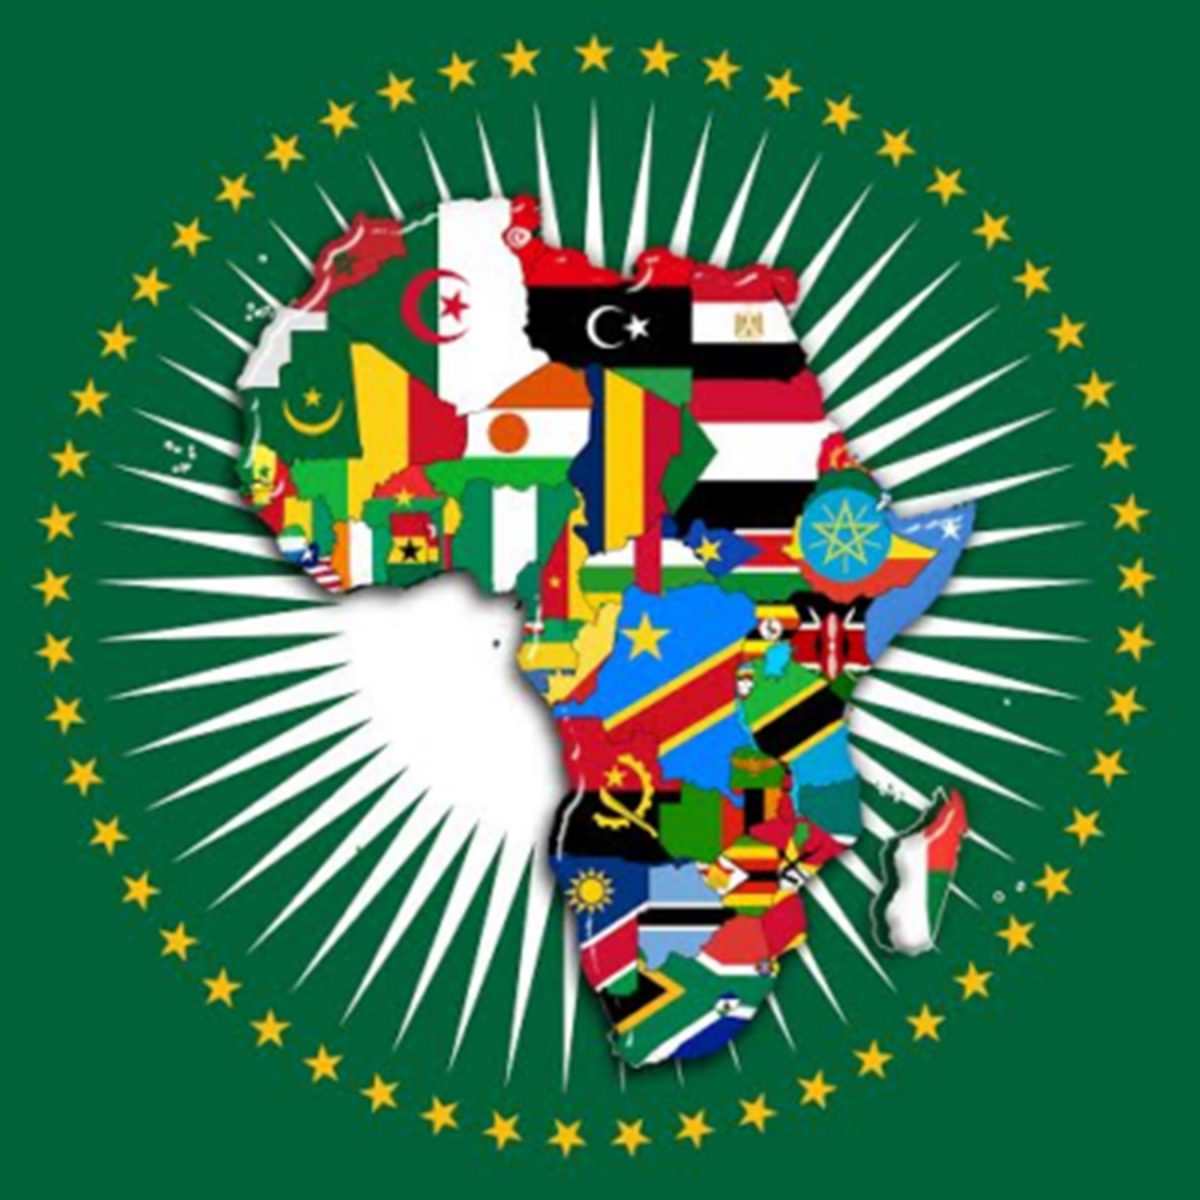 Prospect of Cooperation and Integration between African States